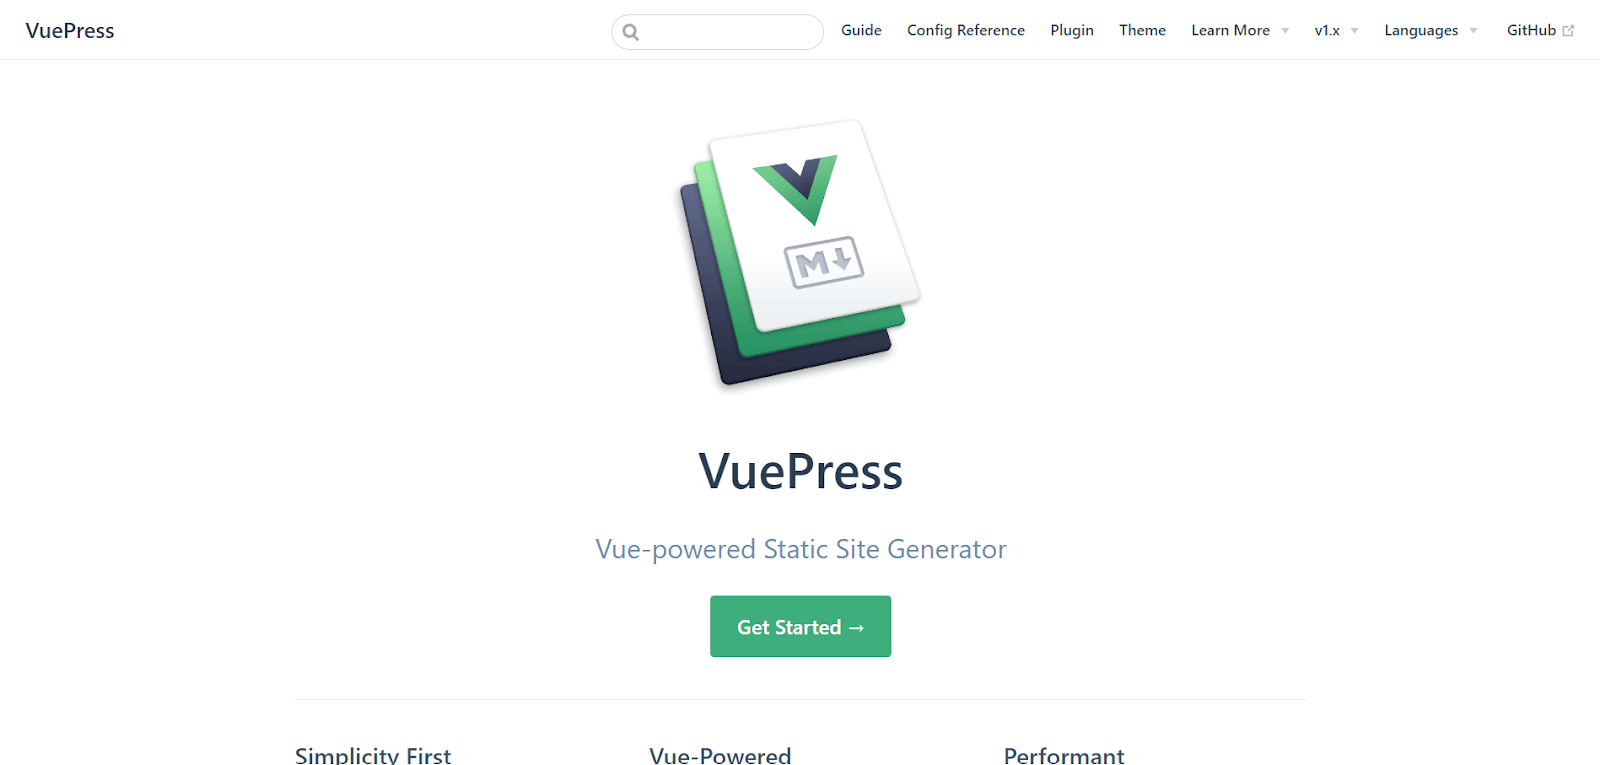 VuePress is an incredible tool